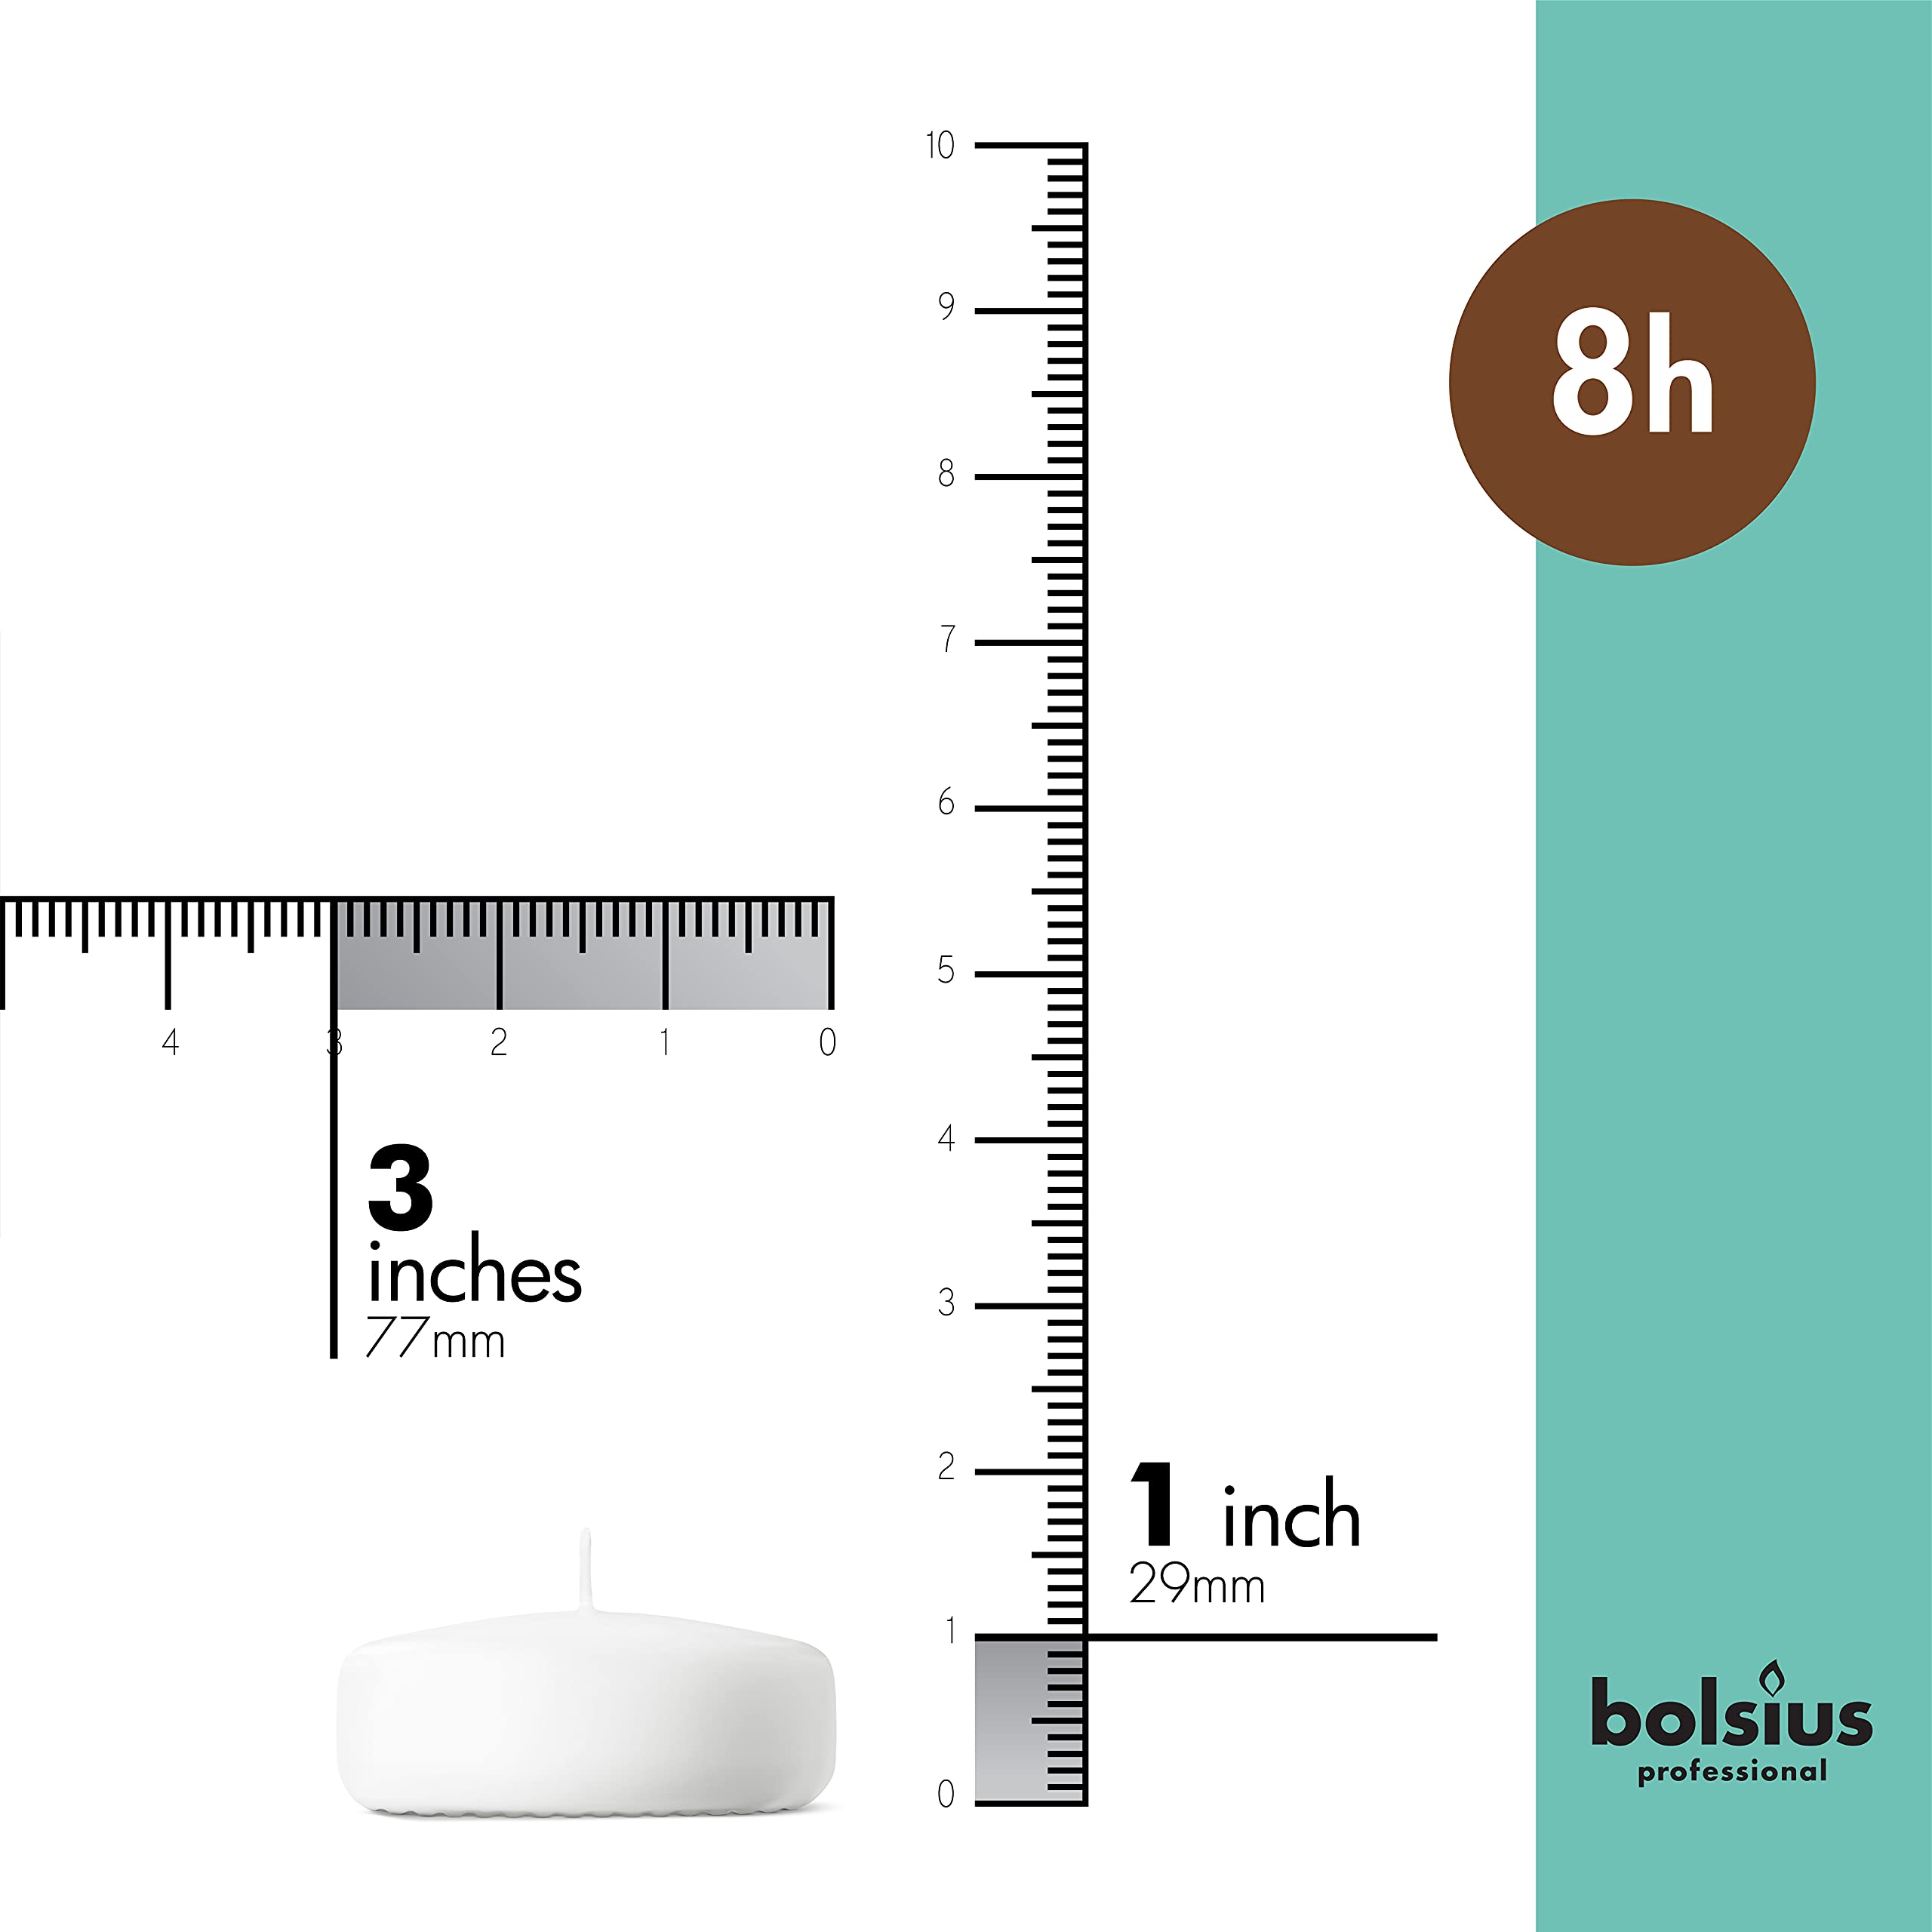 BOLSIUS White Floating Candles 3 Inch - Set Of 12 Maxi Candles - 8 Hour Clean Burning - Palm Oil Free - 0% Animal Fat - Premium European Quality  - Very Good